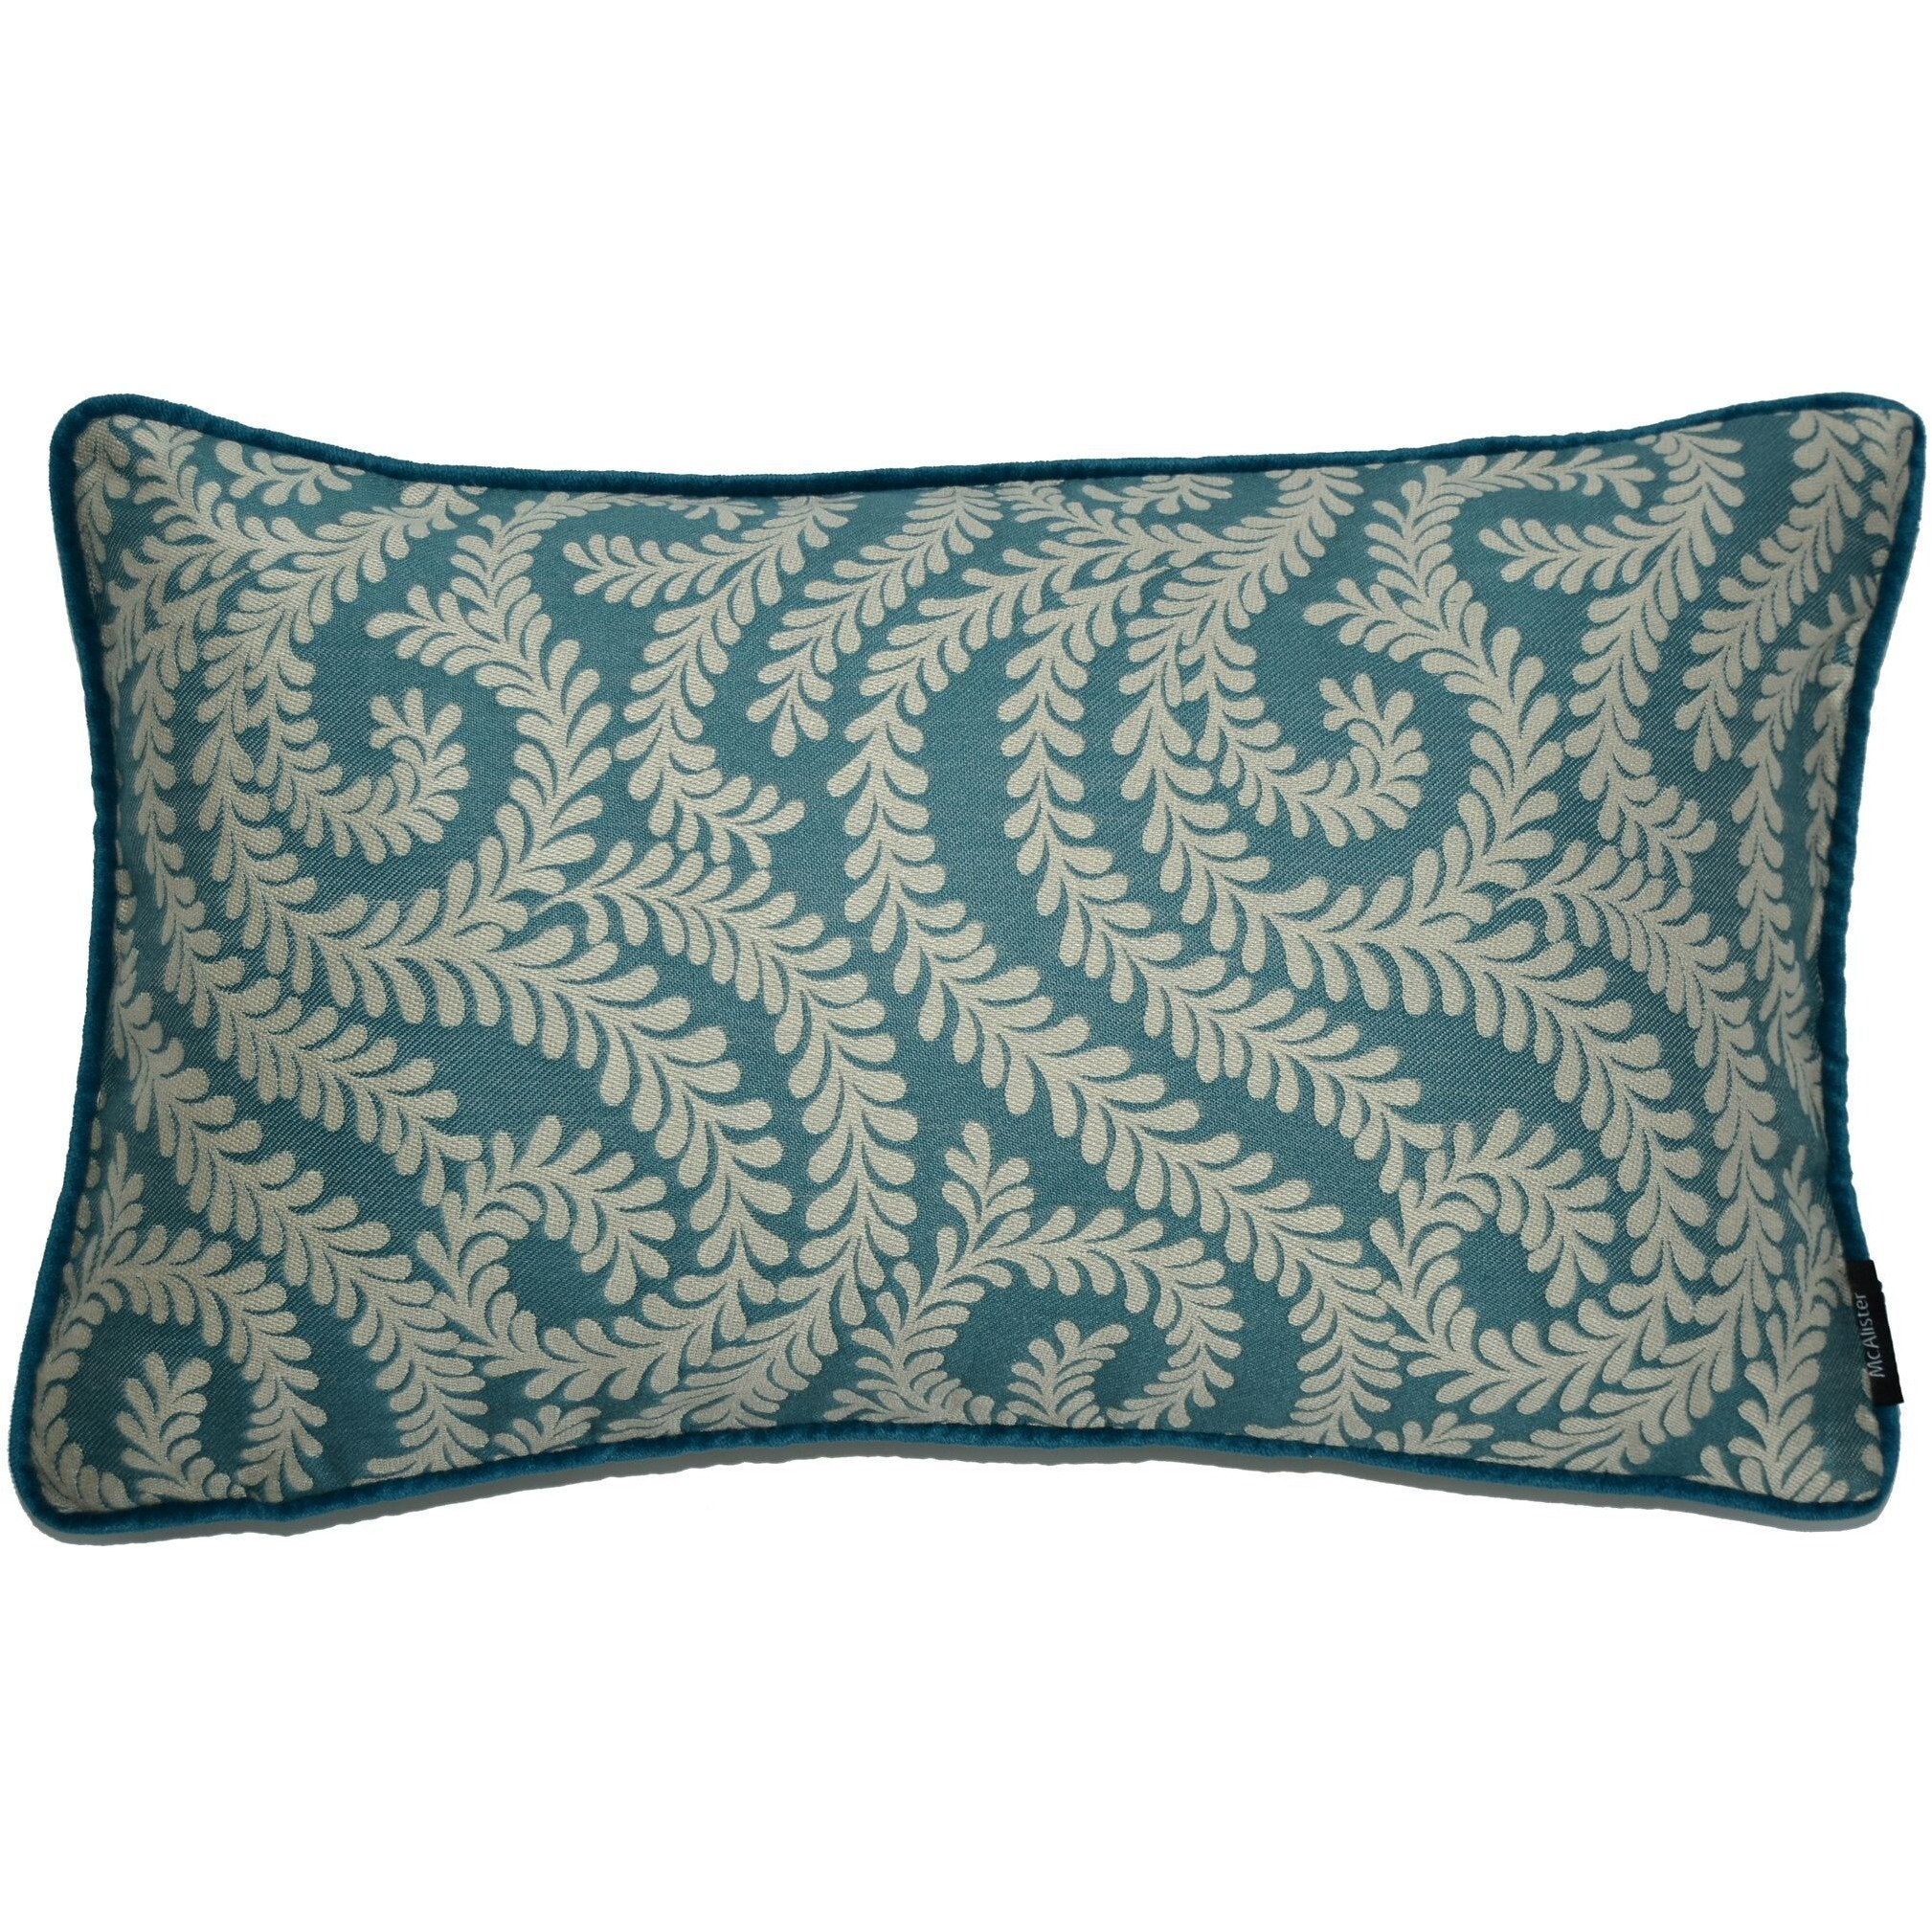 McAlister Textiles Little Leaf Teal Cushion Cushions and Covers Cover Only 50cm x 30cm 